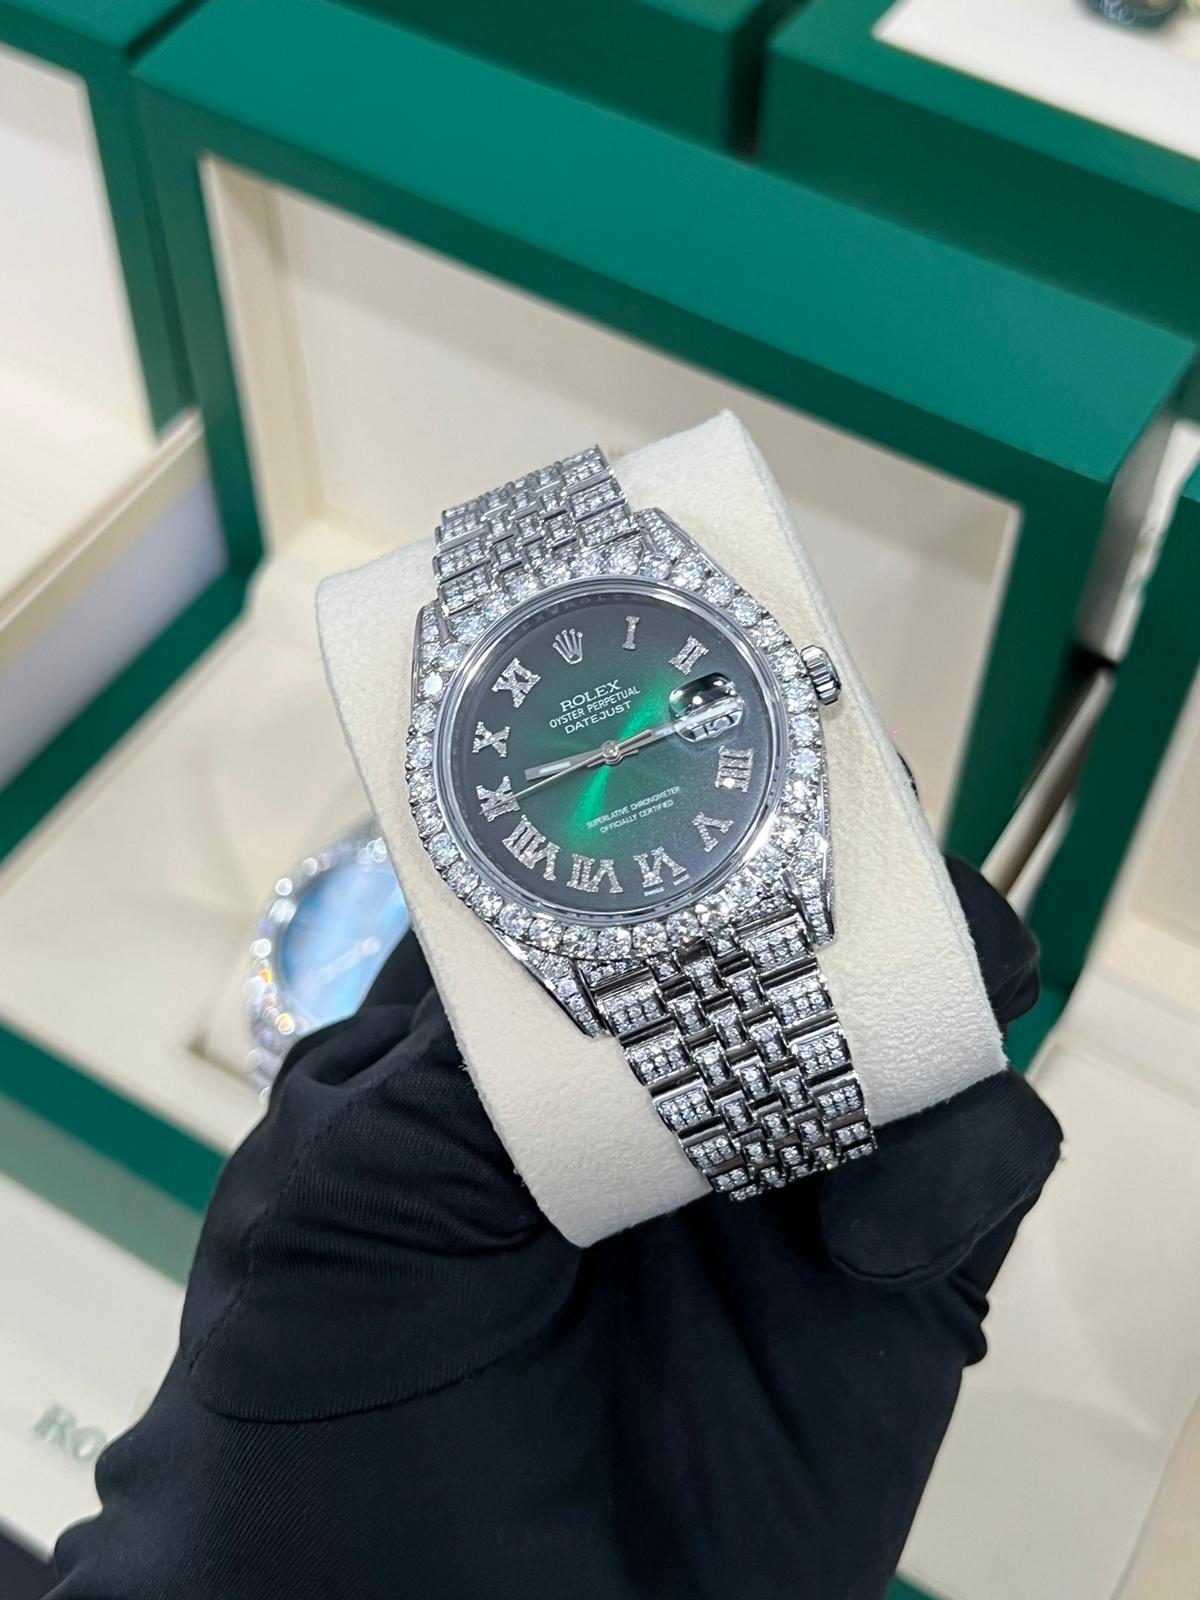 A Beautifully Customized Pave Diamond Dial Datejust 41mm Watch with Roman Numerals!!! This Watch Has Been Set Wonderfully and Is Fully Iced Out! the Diamonds Are Top Quality and the Watch Comes with Box and Papers.
Model number: 126300
Movement: